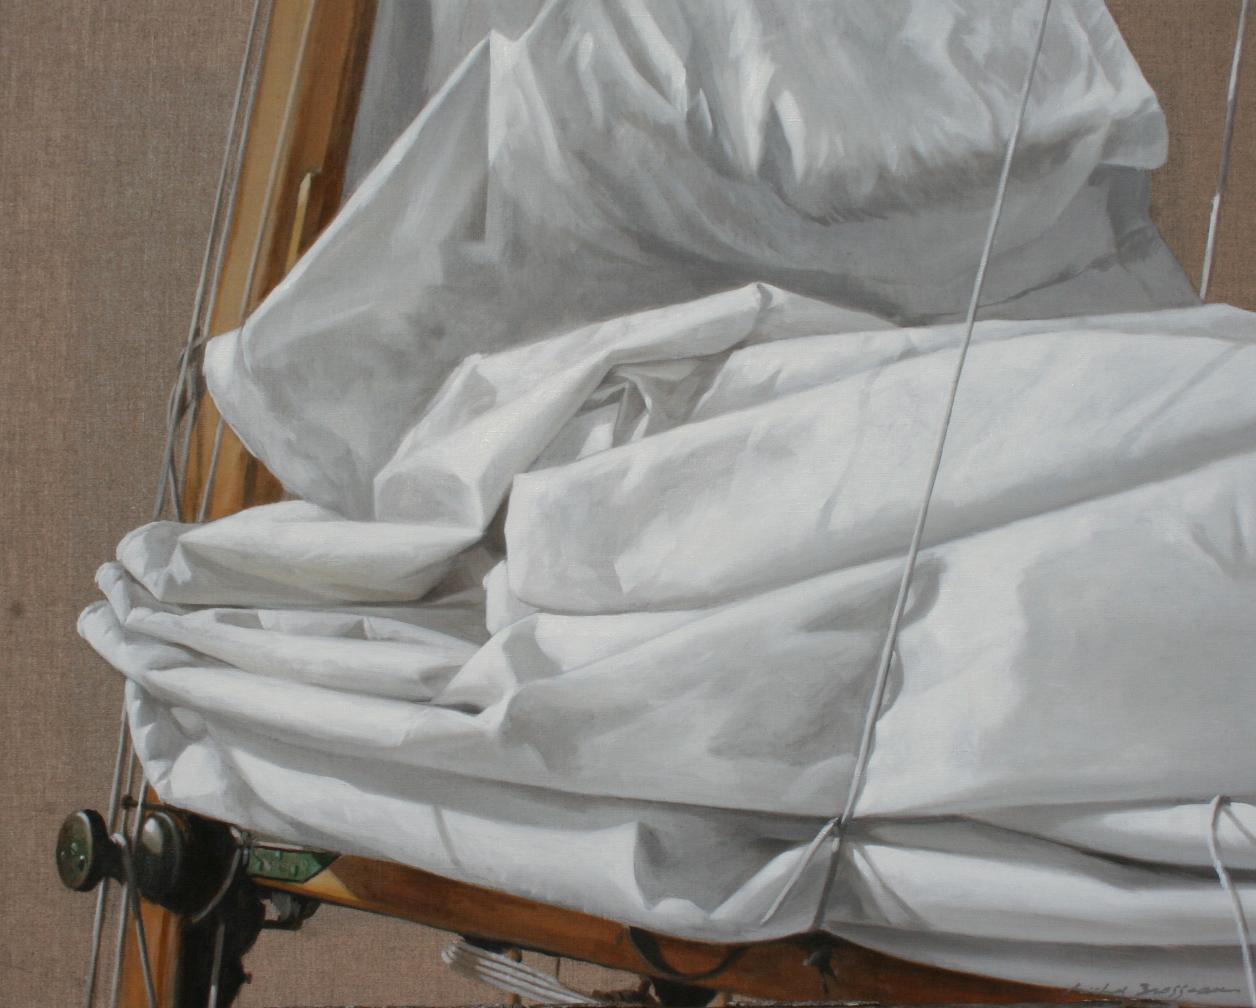 Michel Brosseau Still-Life Painting - "Classic White (O)" photorealist oil painting of a detailed Sail's Canvas